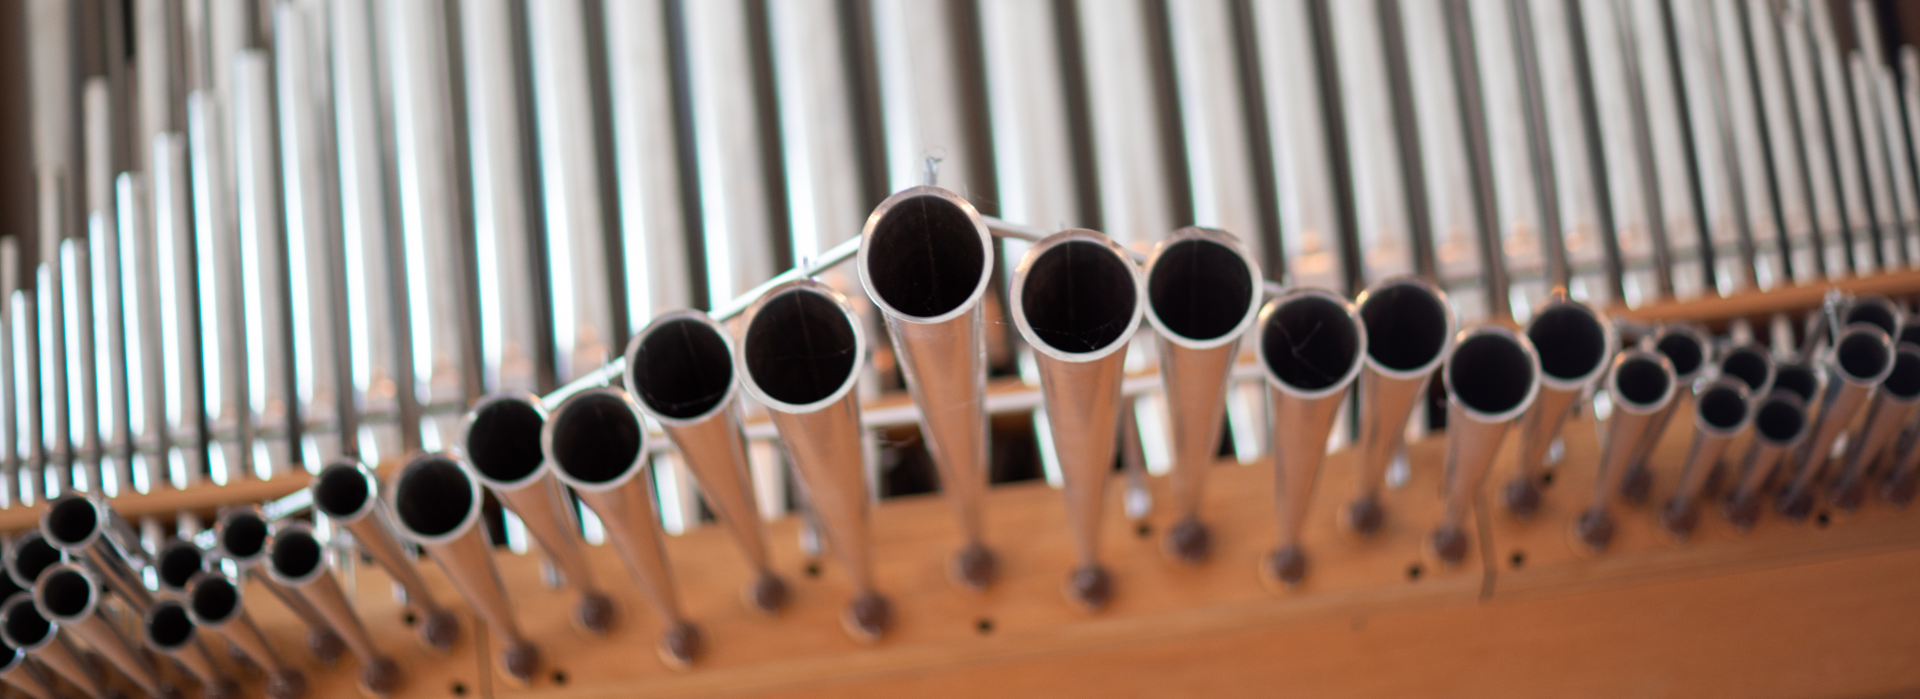 pipes 3a banner format